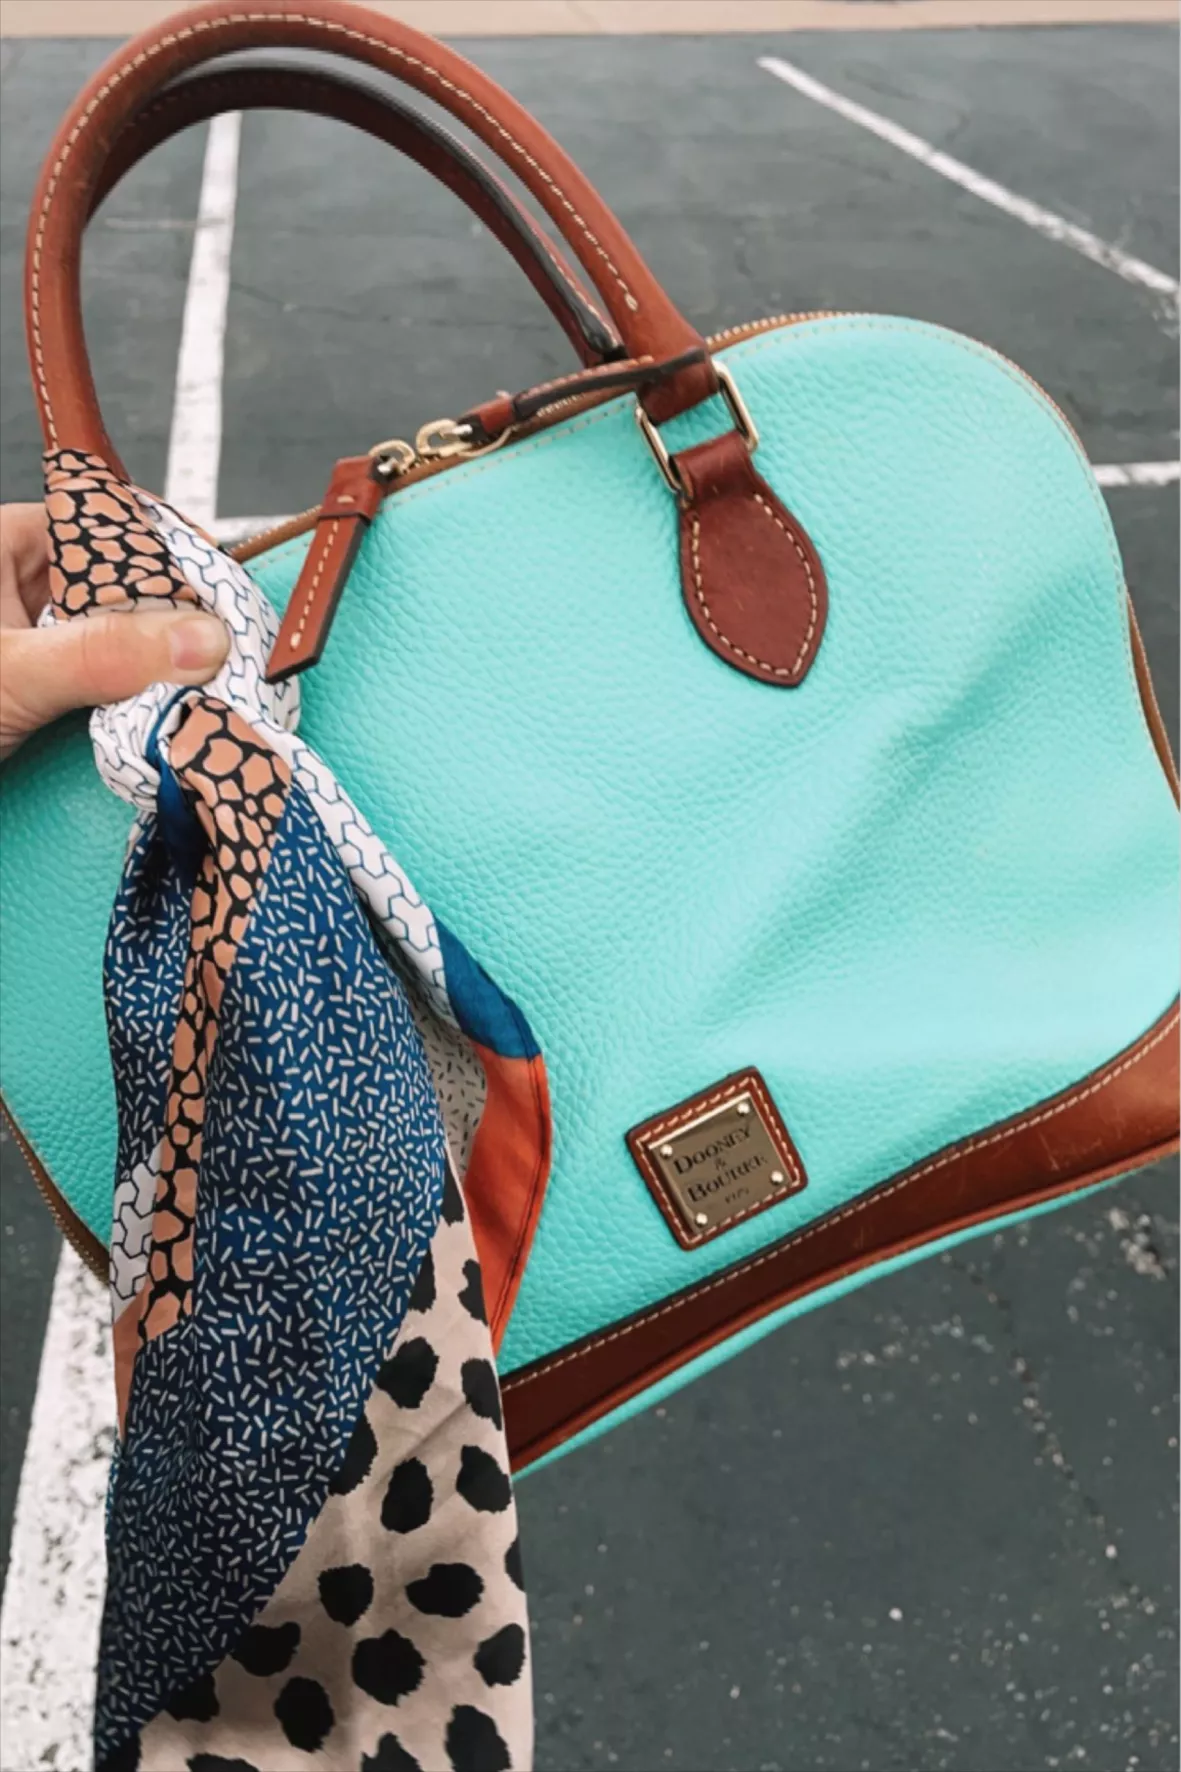 Adrienne Vittadini Dome Satchel with Dangle Teal